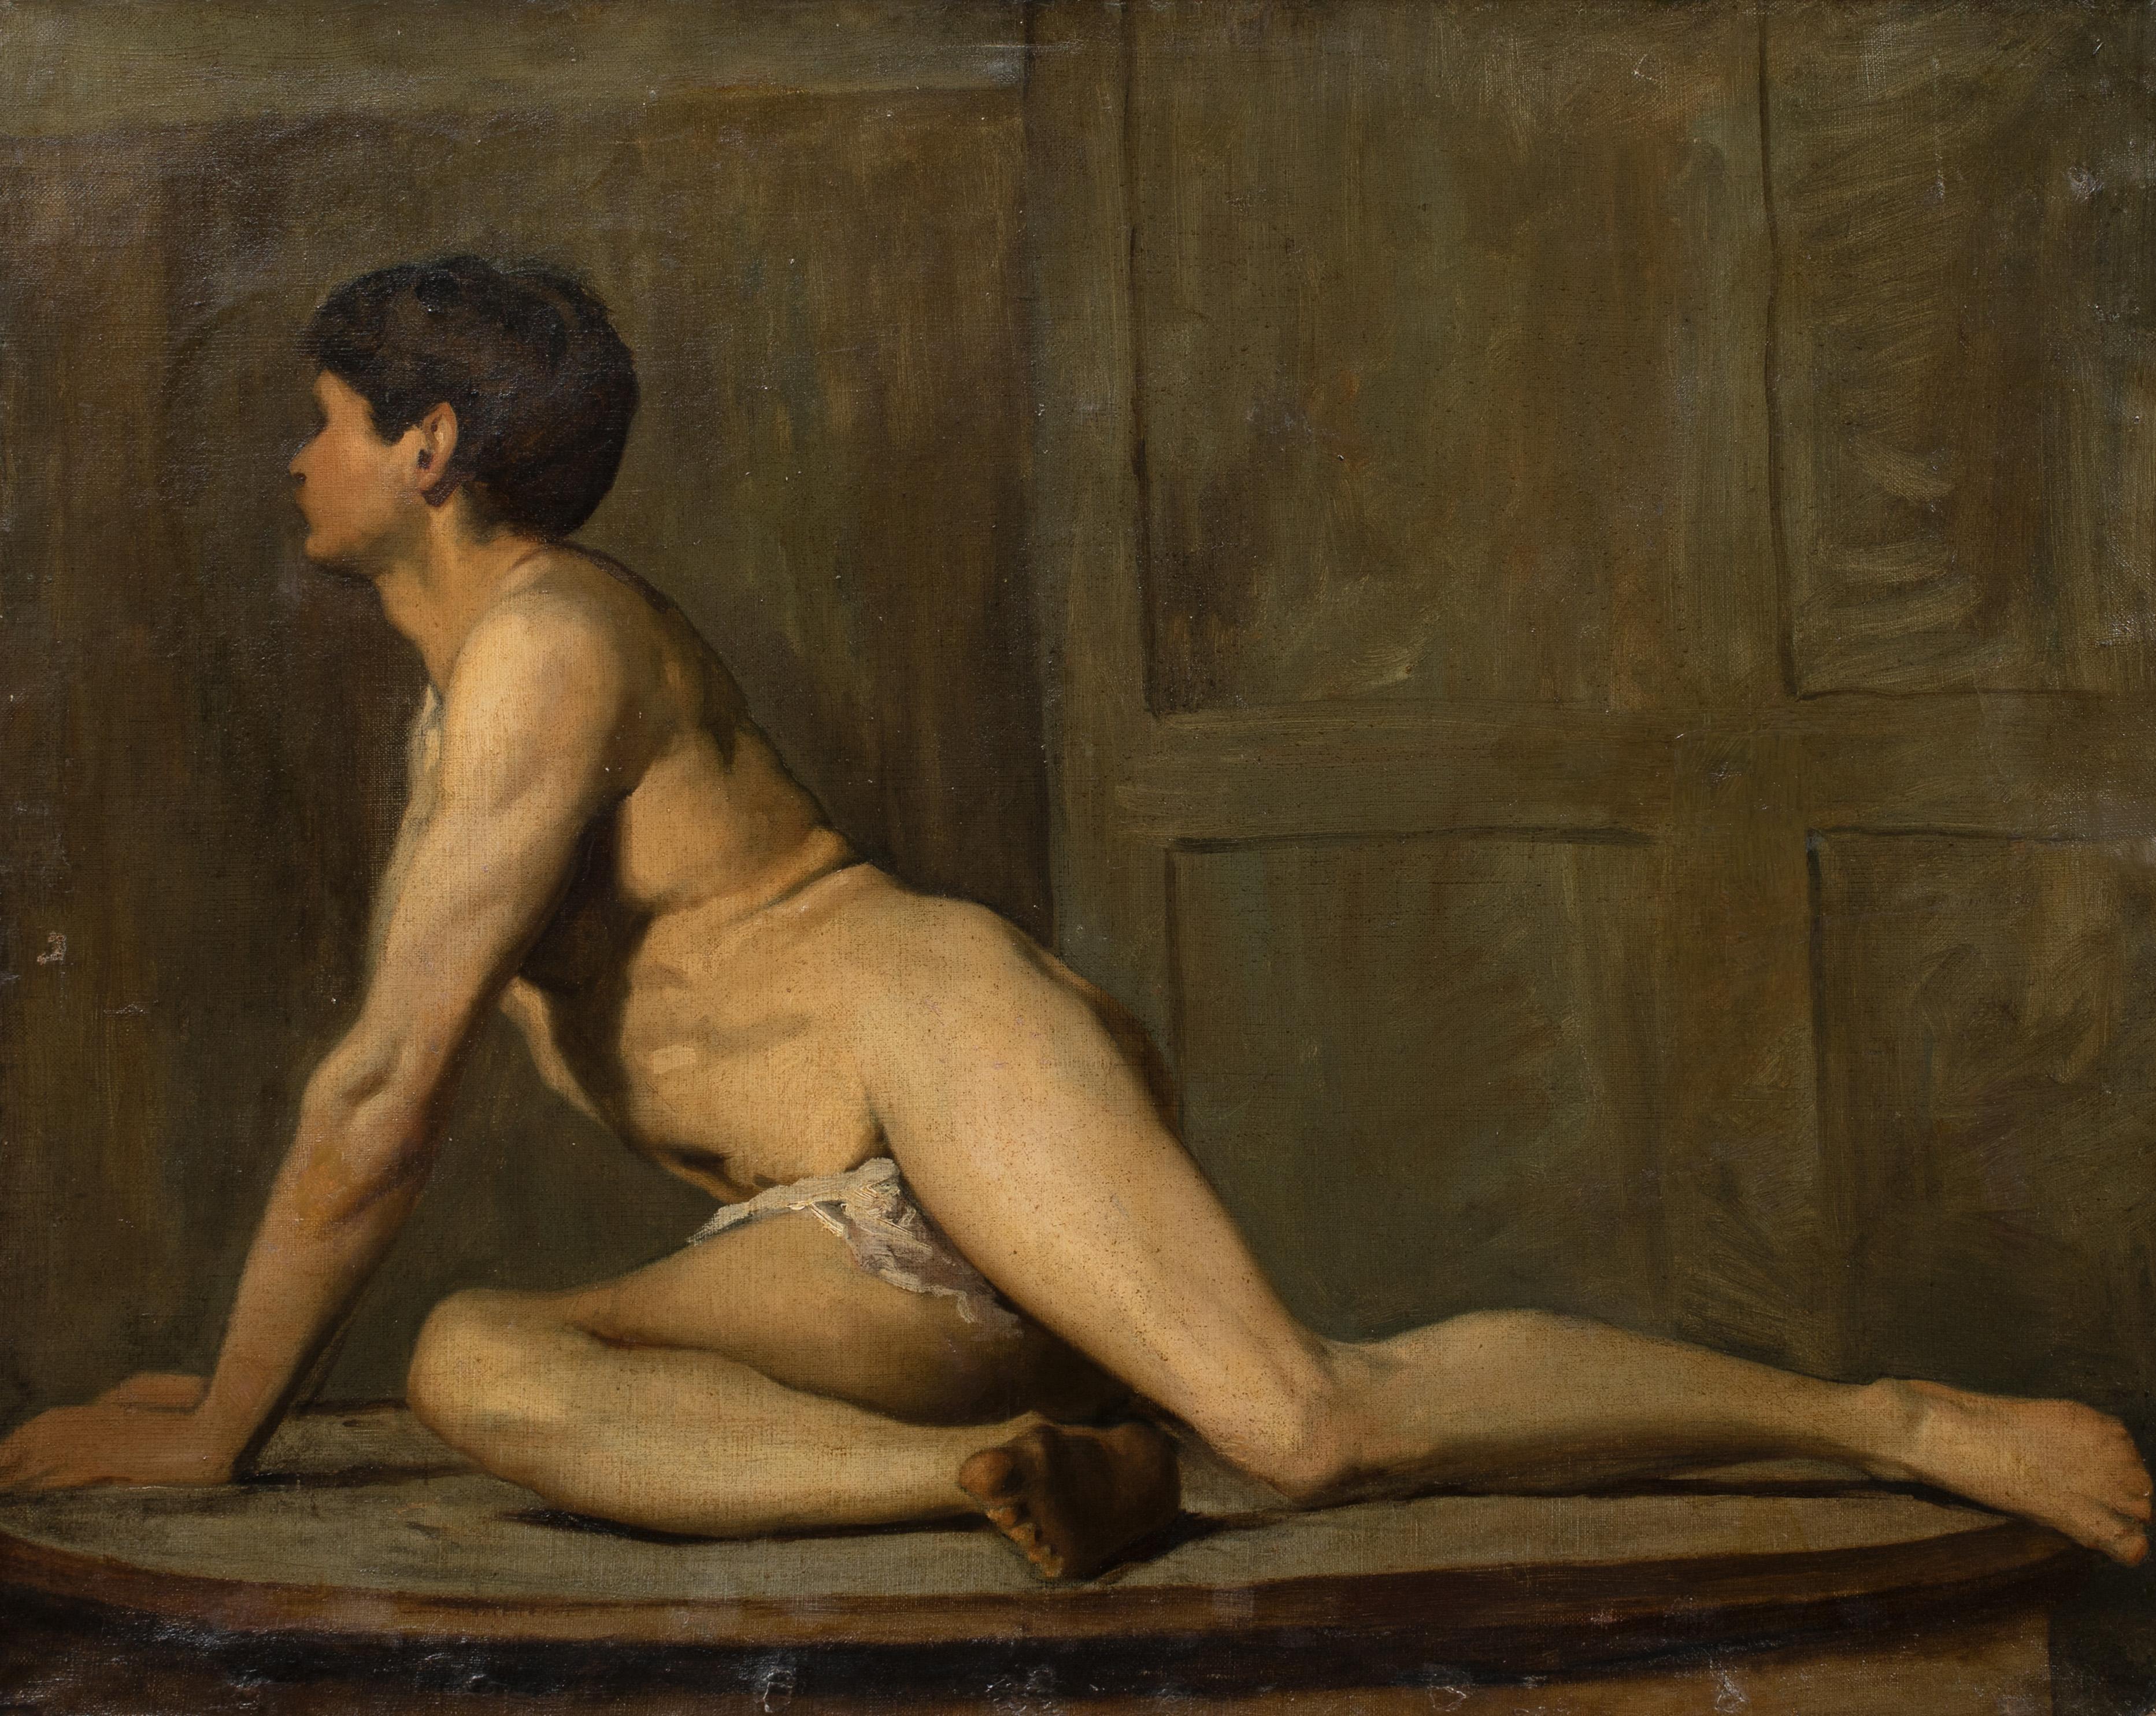 Unknown Portrait Painting - Nude Portrait Of A Boy, early 20th